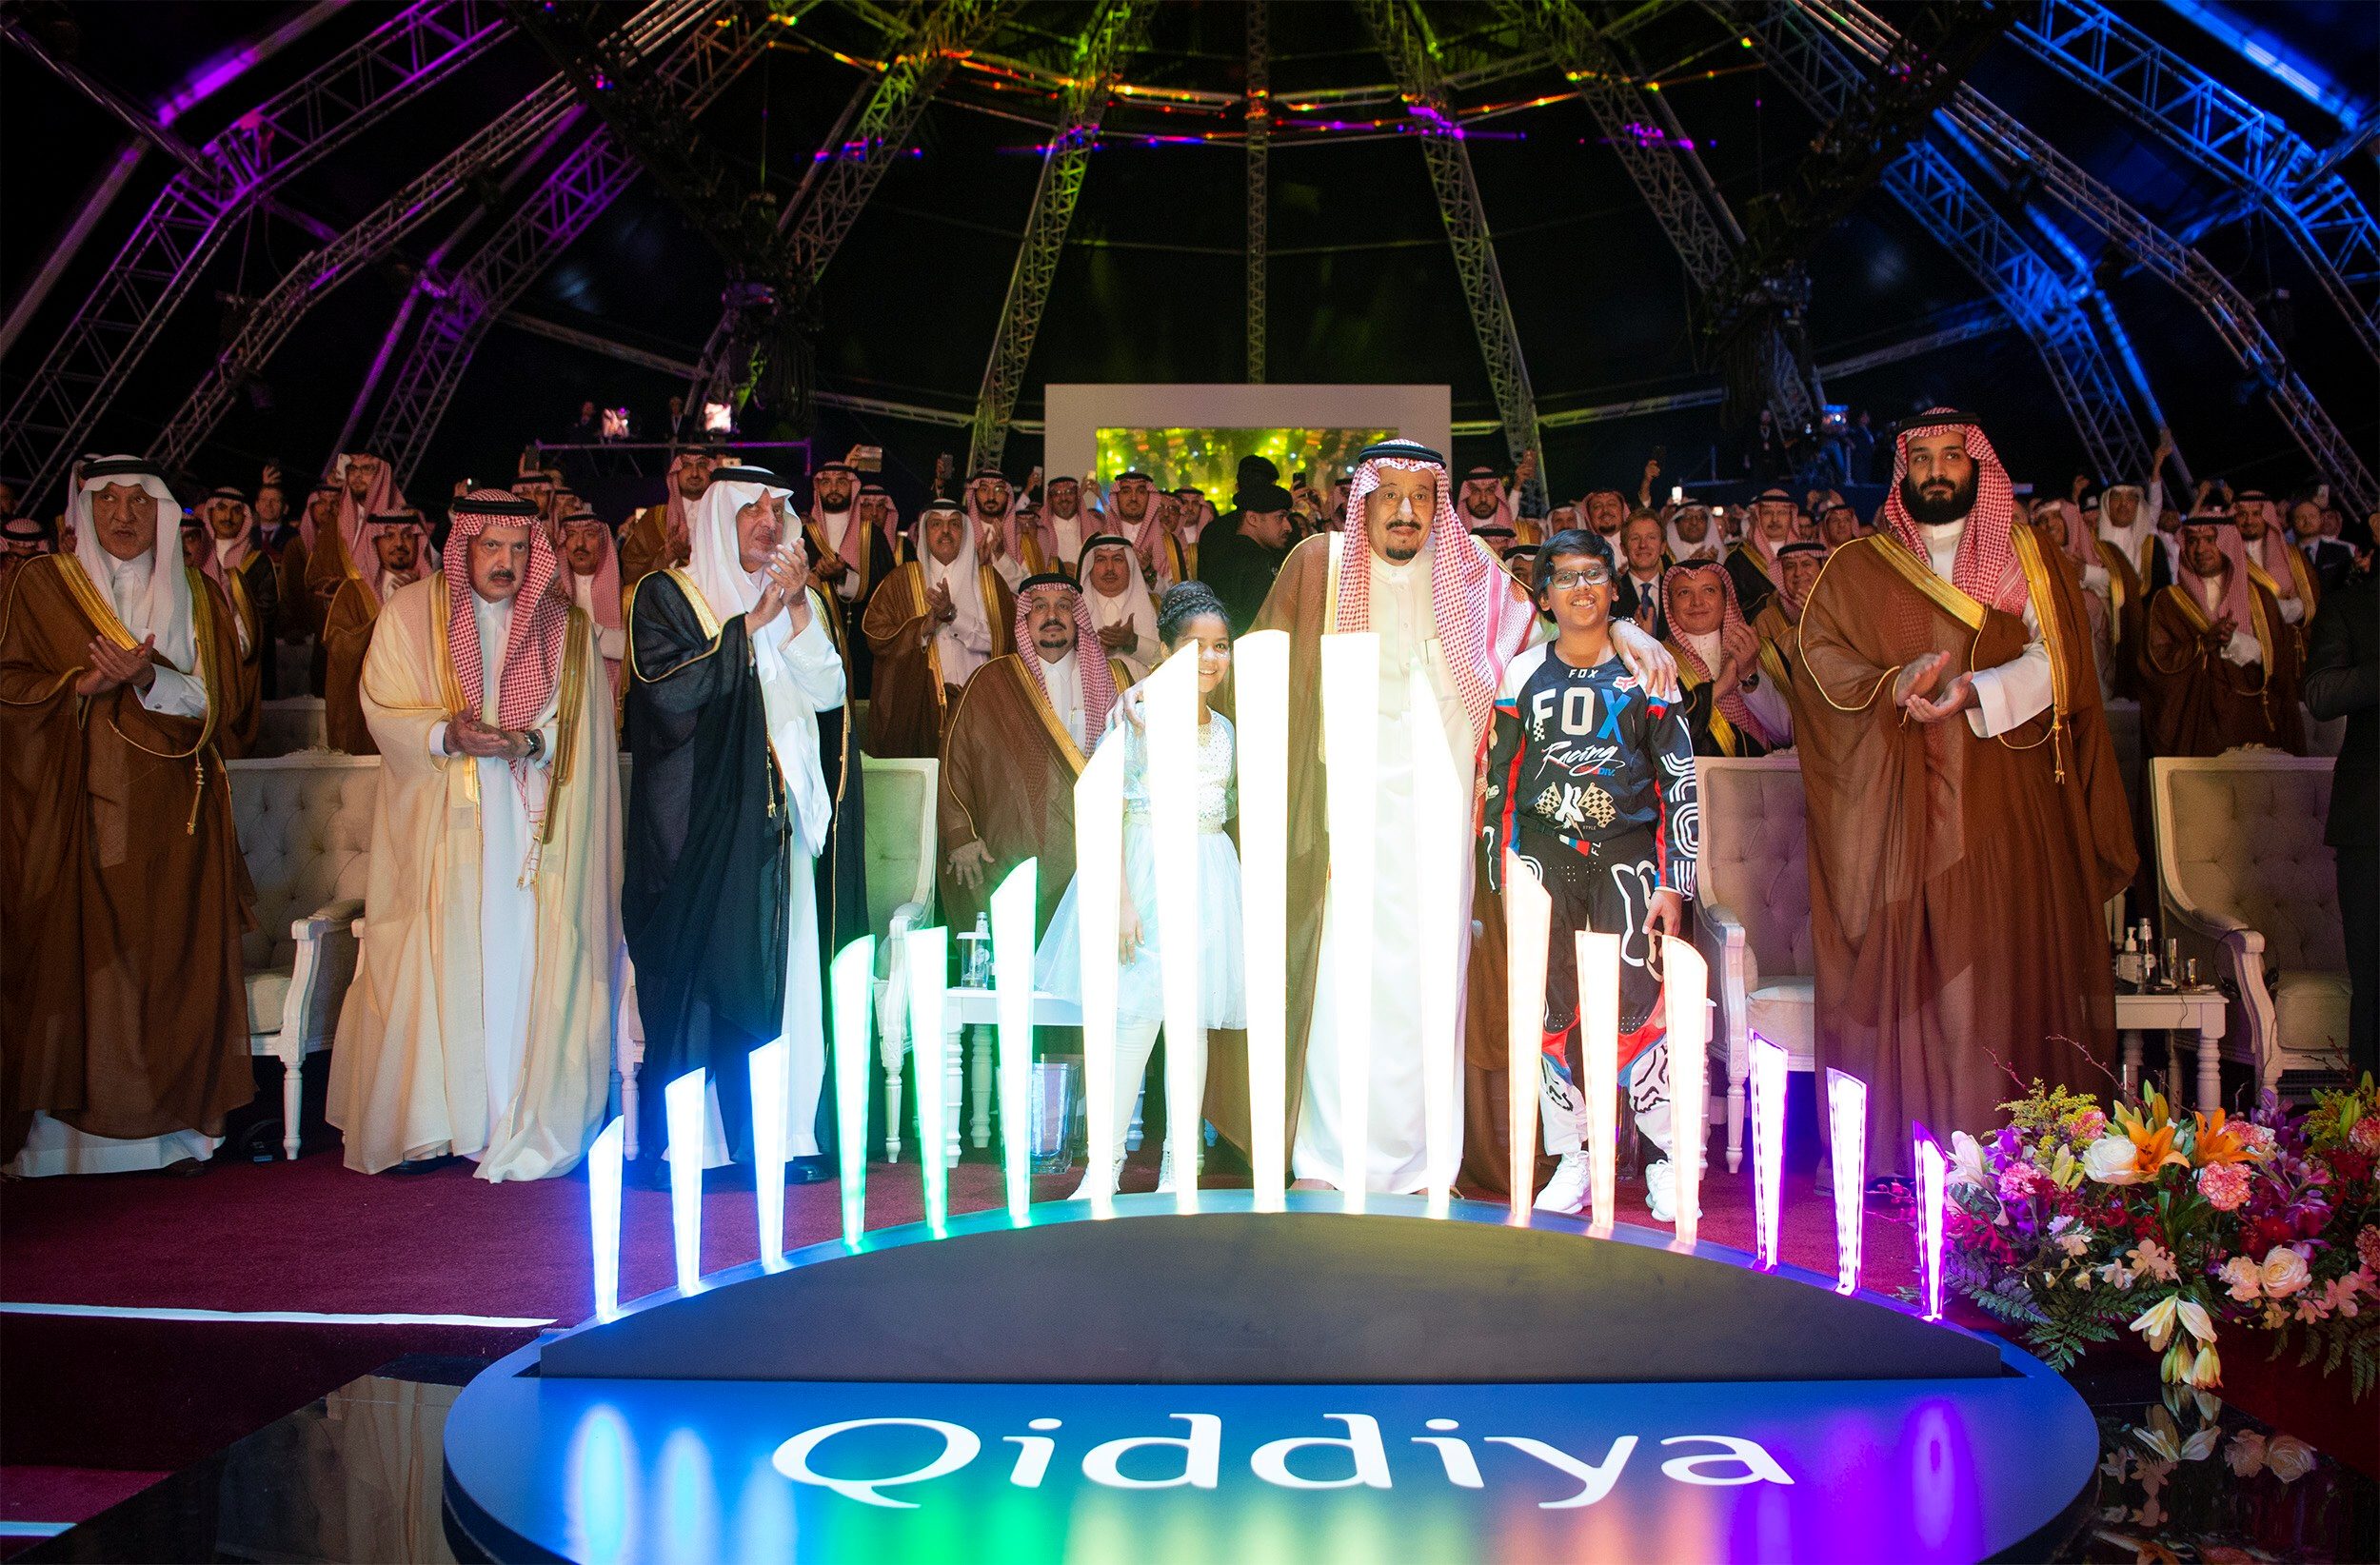 Qiddiya's launch celebration. The leisure city is to absorb the enterainment company Seven